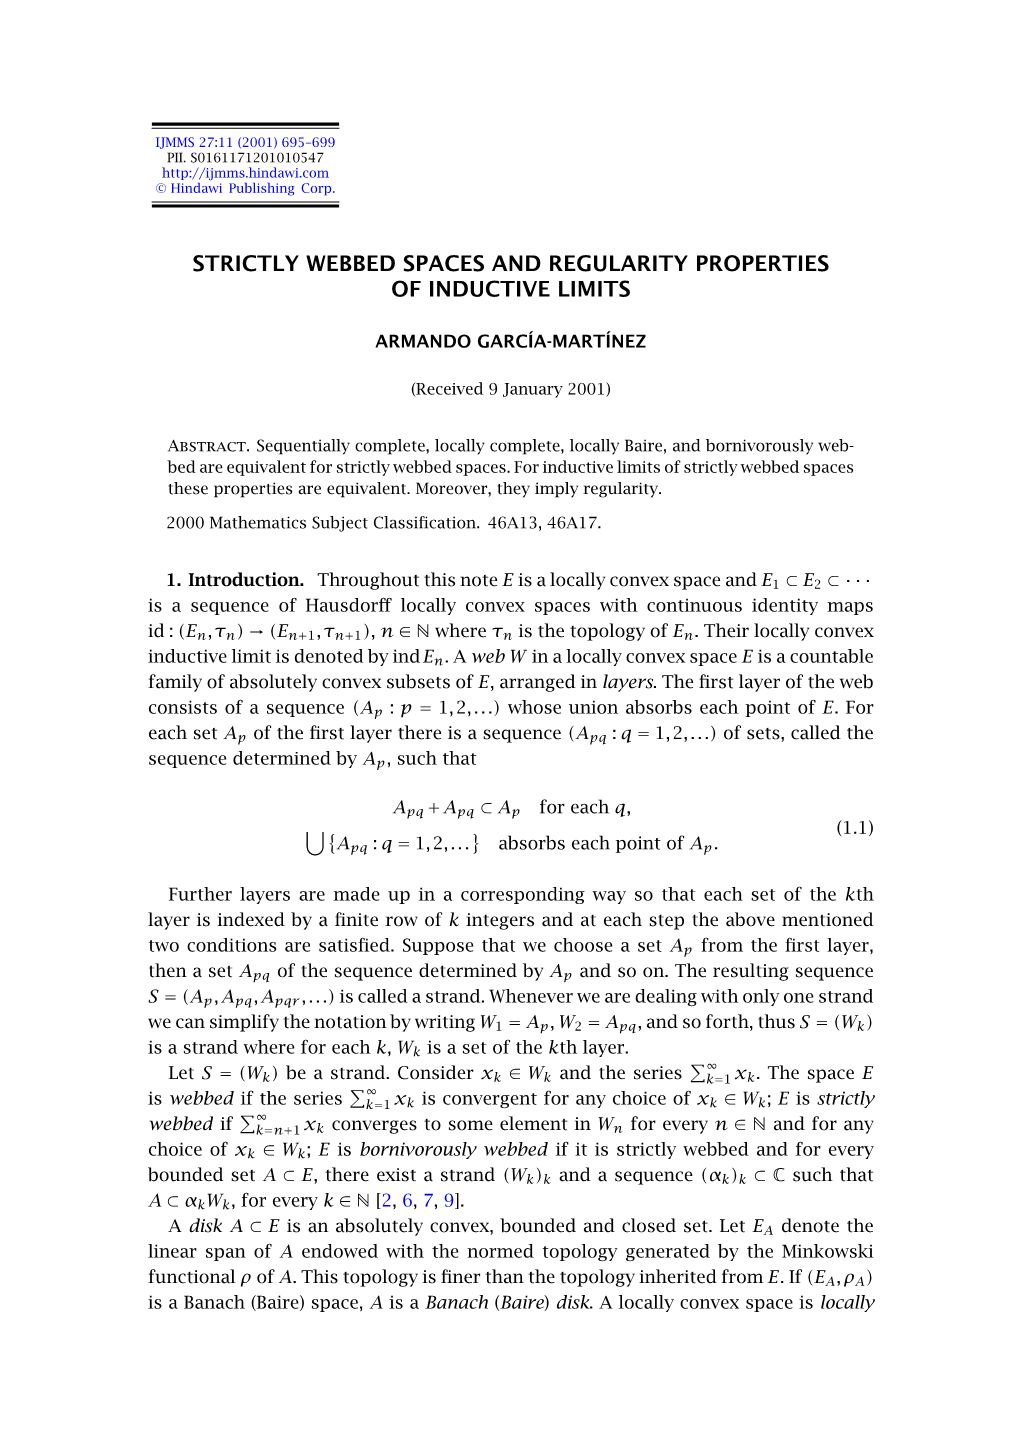 Strictly Webbed Spaces and Regularity Properties of Inductive Limits